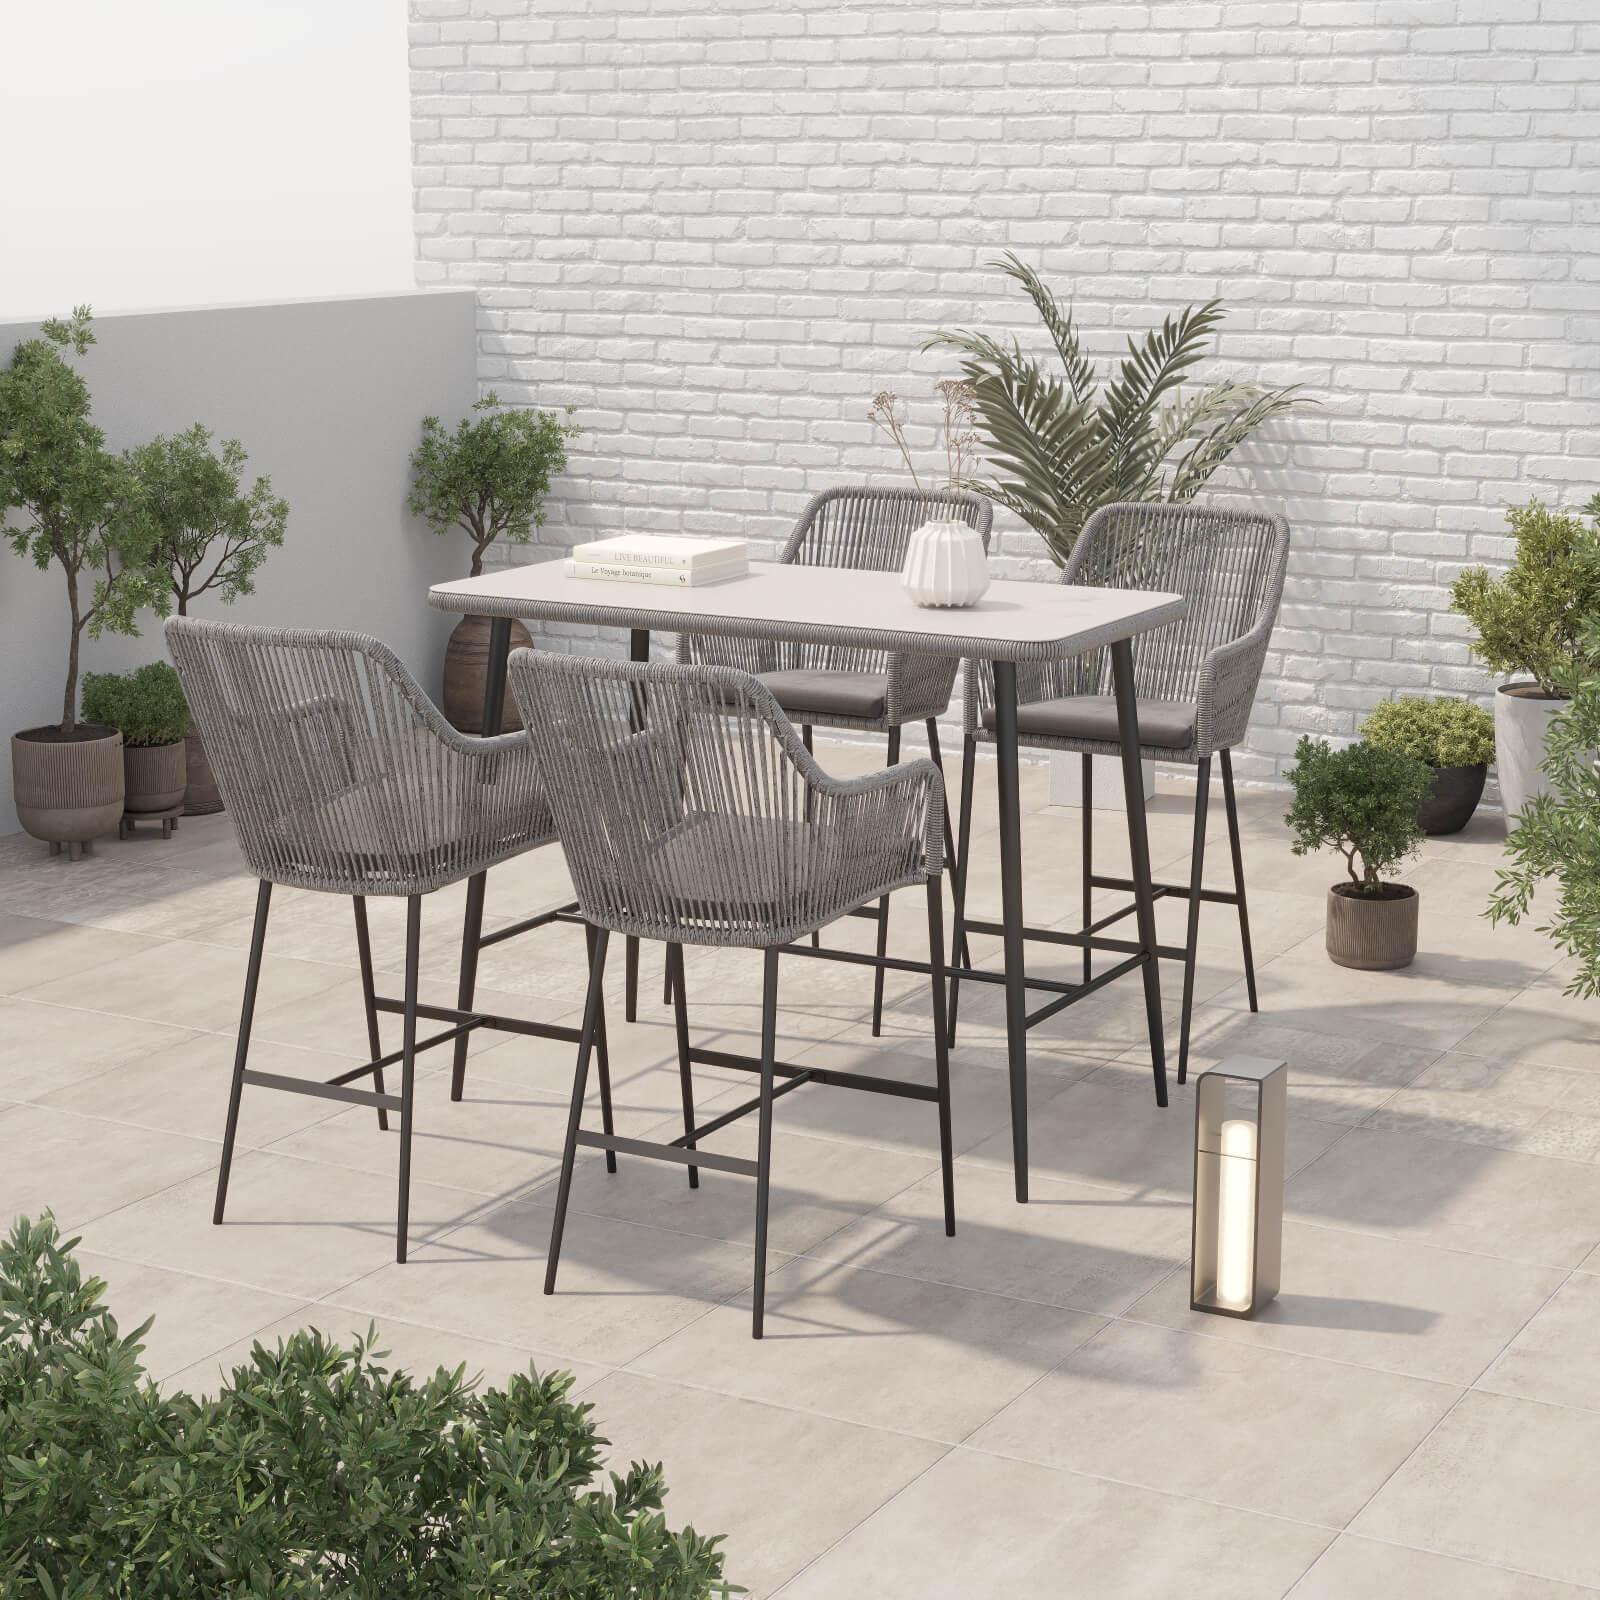 Hallerbos Modern Wicker Outdoor Furniture, steel frame outdoor bar height set with grey twisted rattan design, 1 bar table, 4 bar chairs, side view - Jardina Furniture